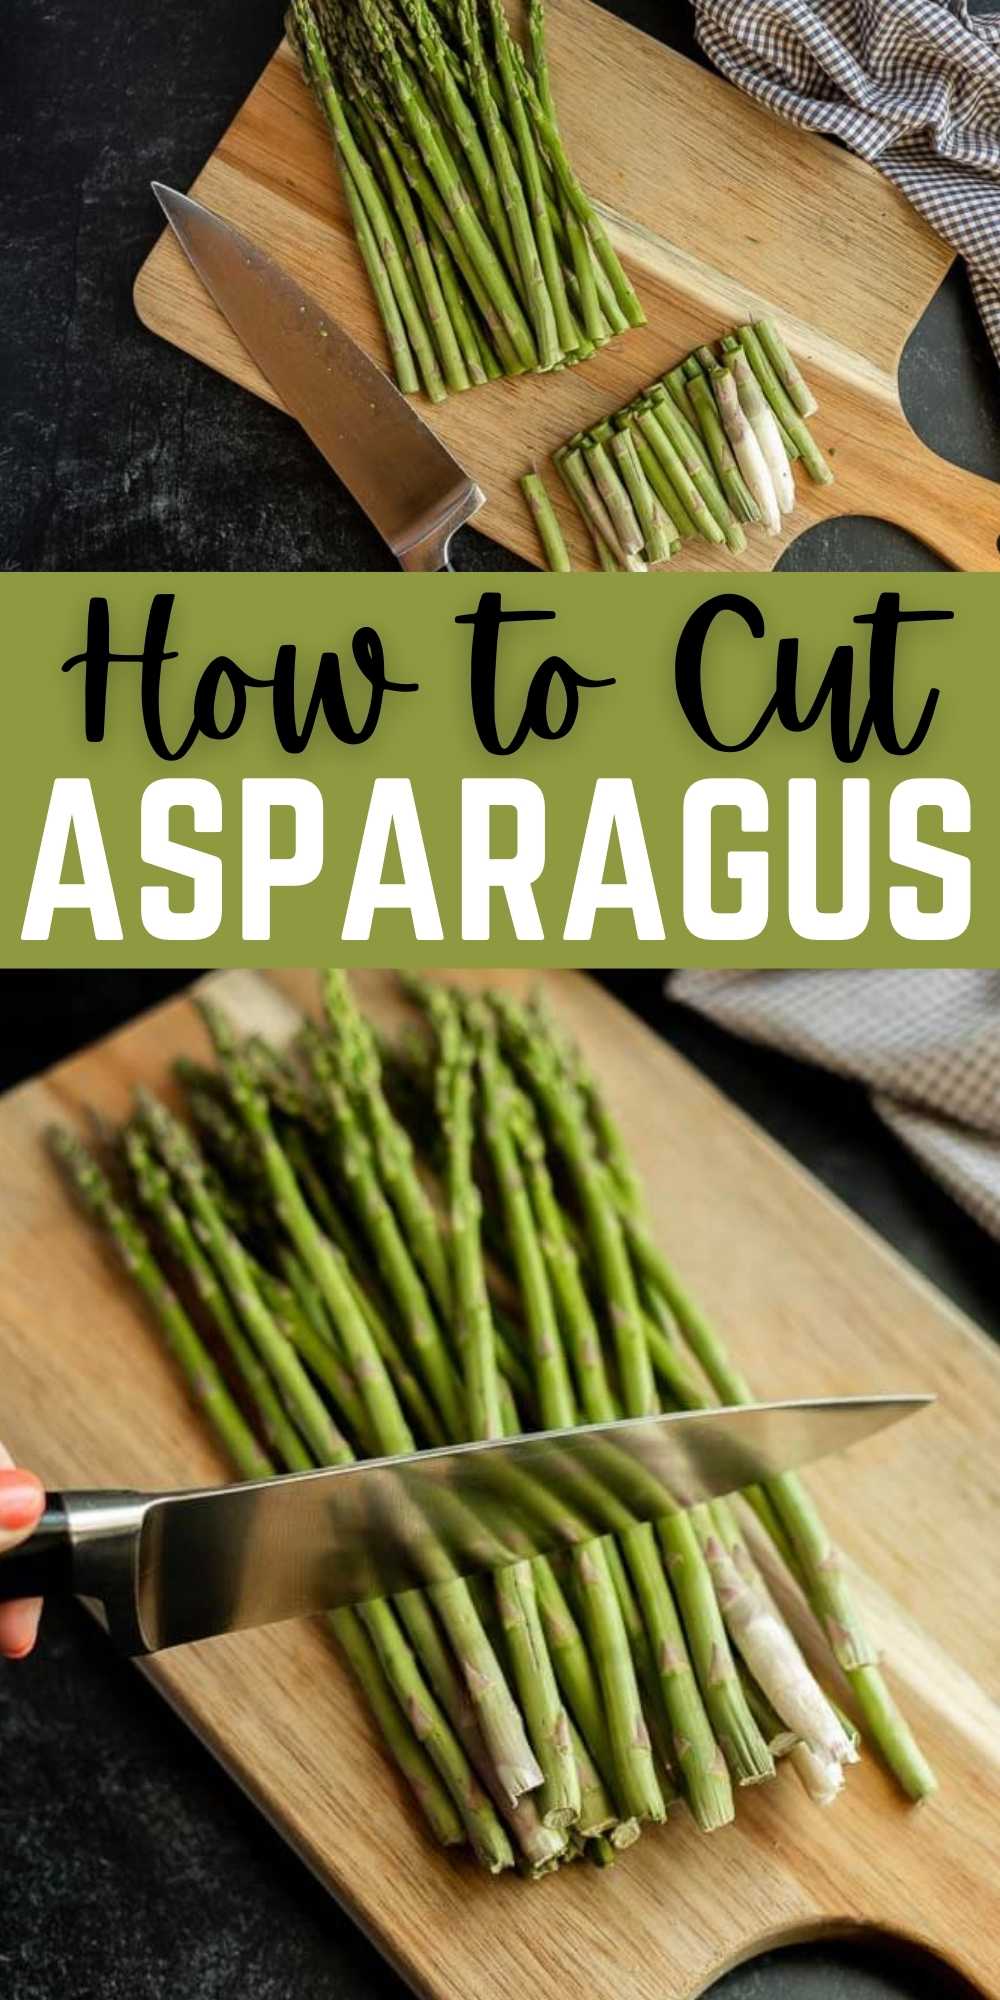 Follow these easy steps on How to Cut Asparagus. Asparagus is an easy side side that has many health benefits and is a delicious vegetable. Learn the best and easiest way to trim asparagus. #eatingonadime #howto #cutasparagus #knifeskills 
